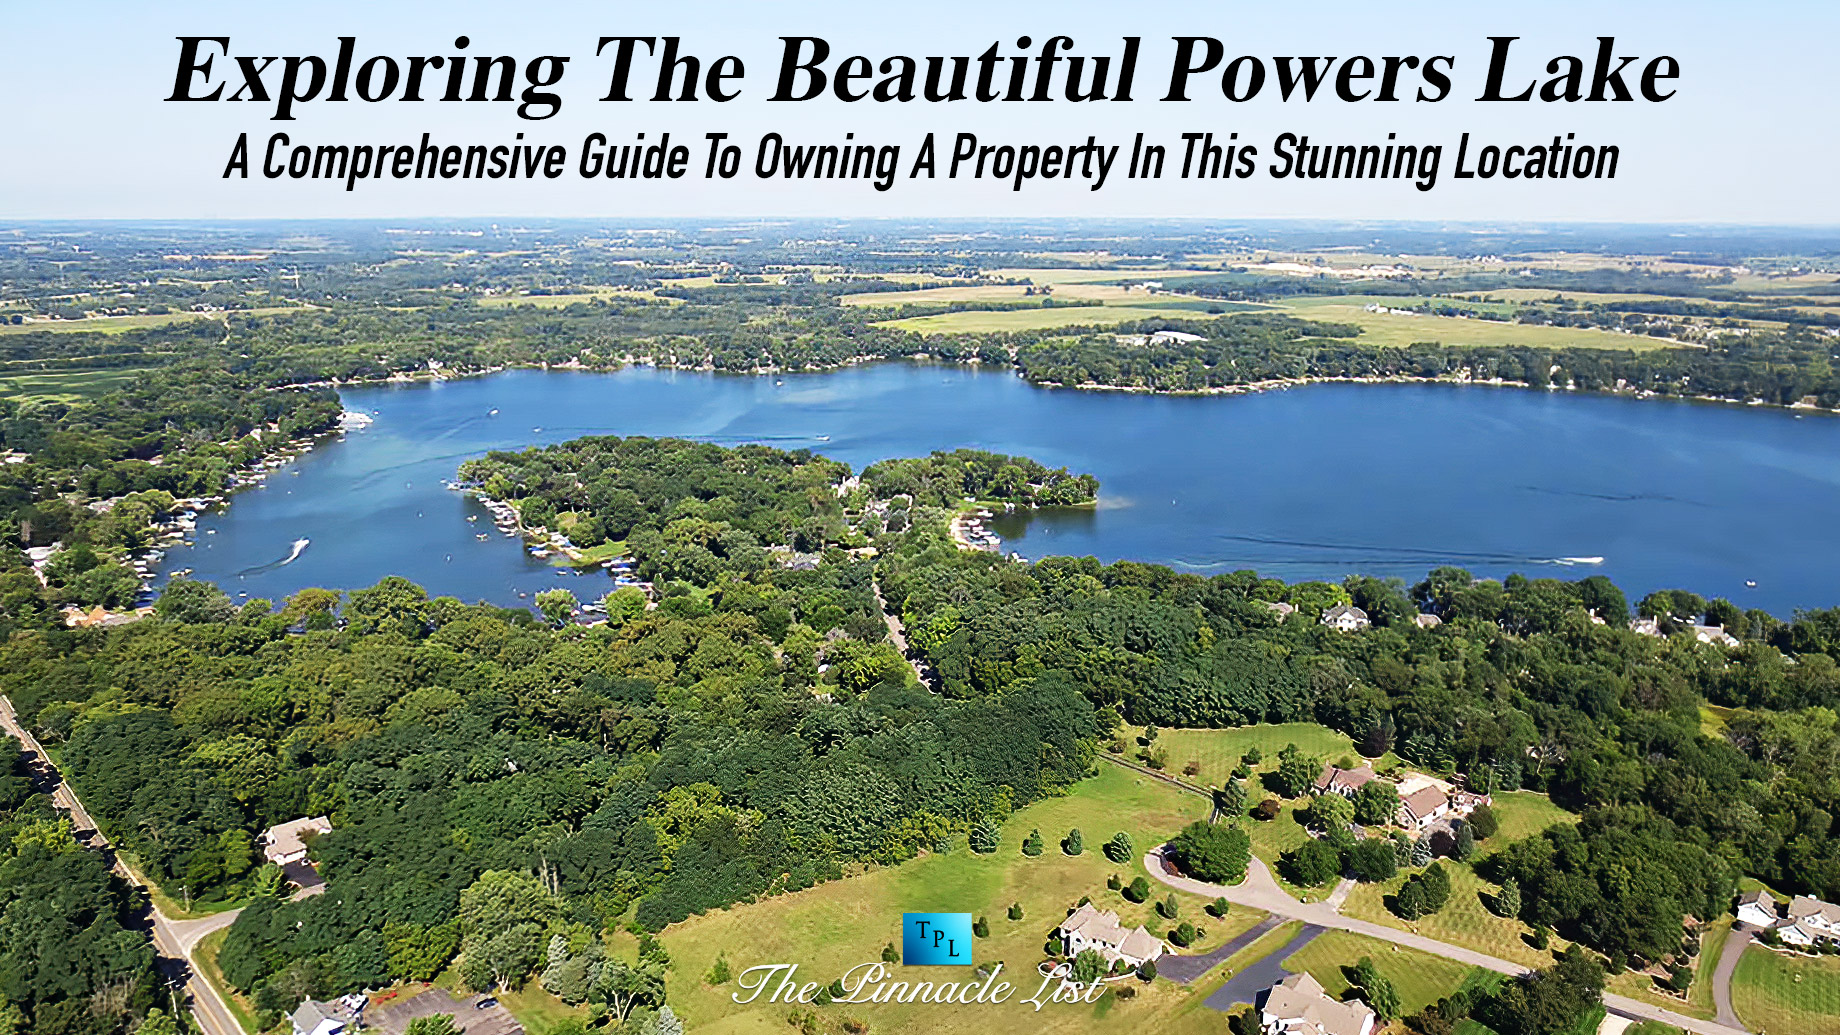 Exploring The Beautiful Powers Lake: A Comprehensive Guide To Owning A Property In This Stunning Location